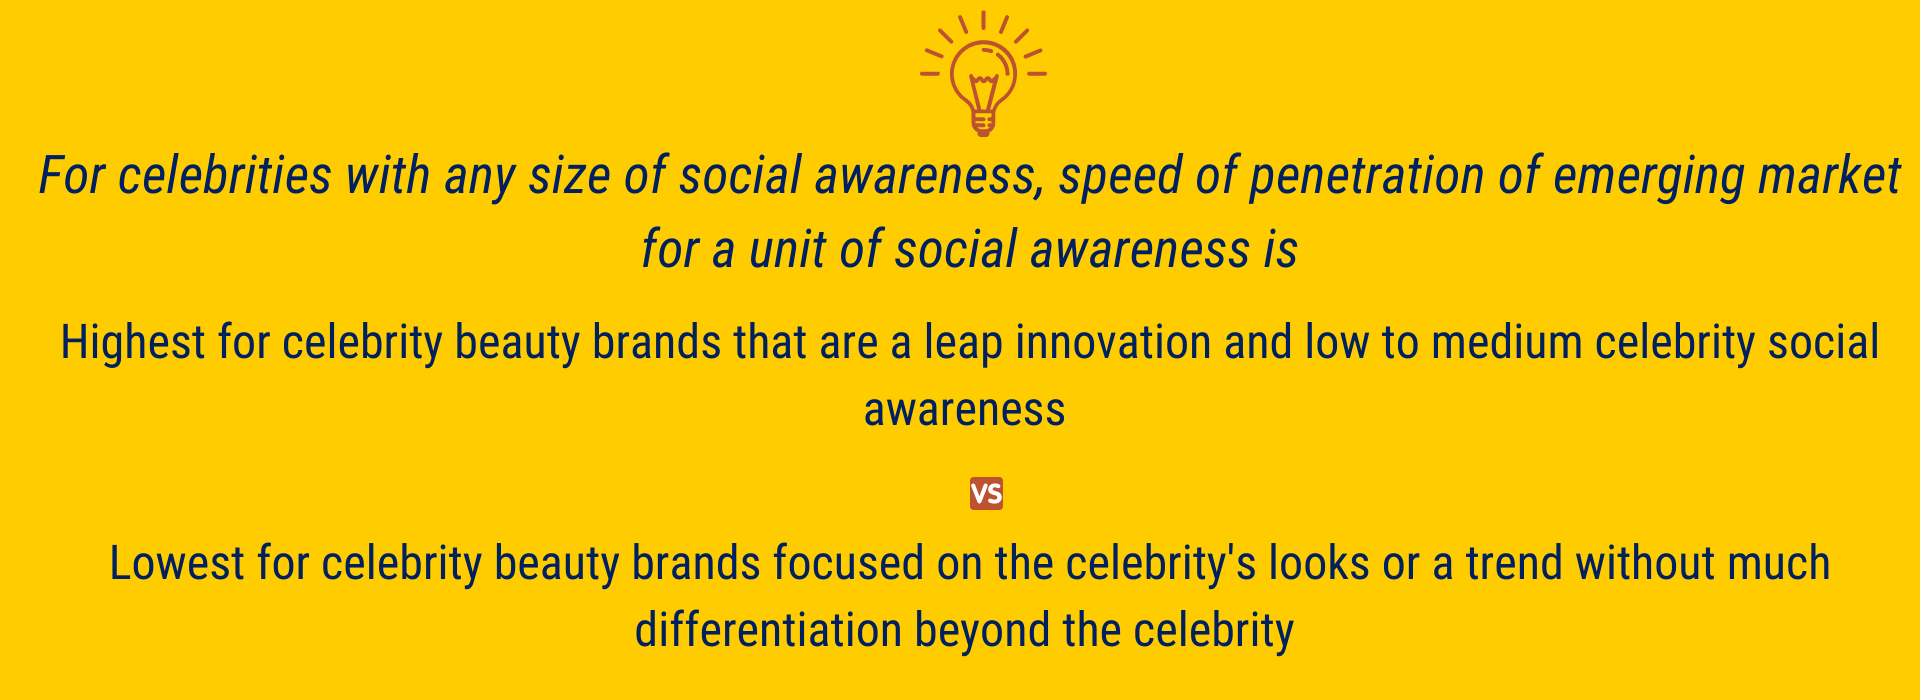 Celebrity beauty brand strategy for fastest speed of penetration per unit of awareness